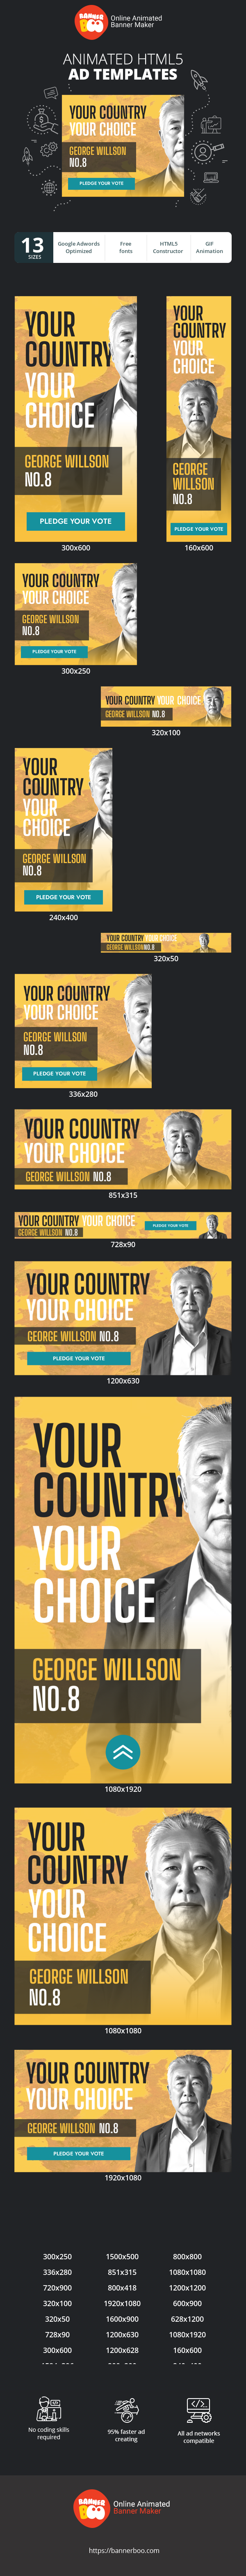 Banner ad template — Your Country Your Choice George Willson NO.3 — Election Campaign